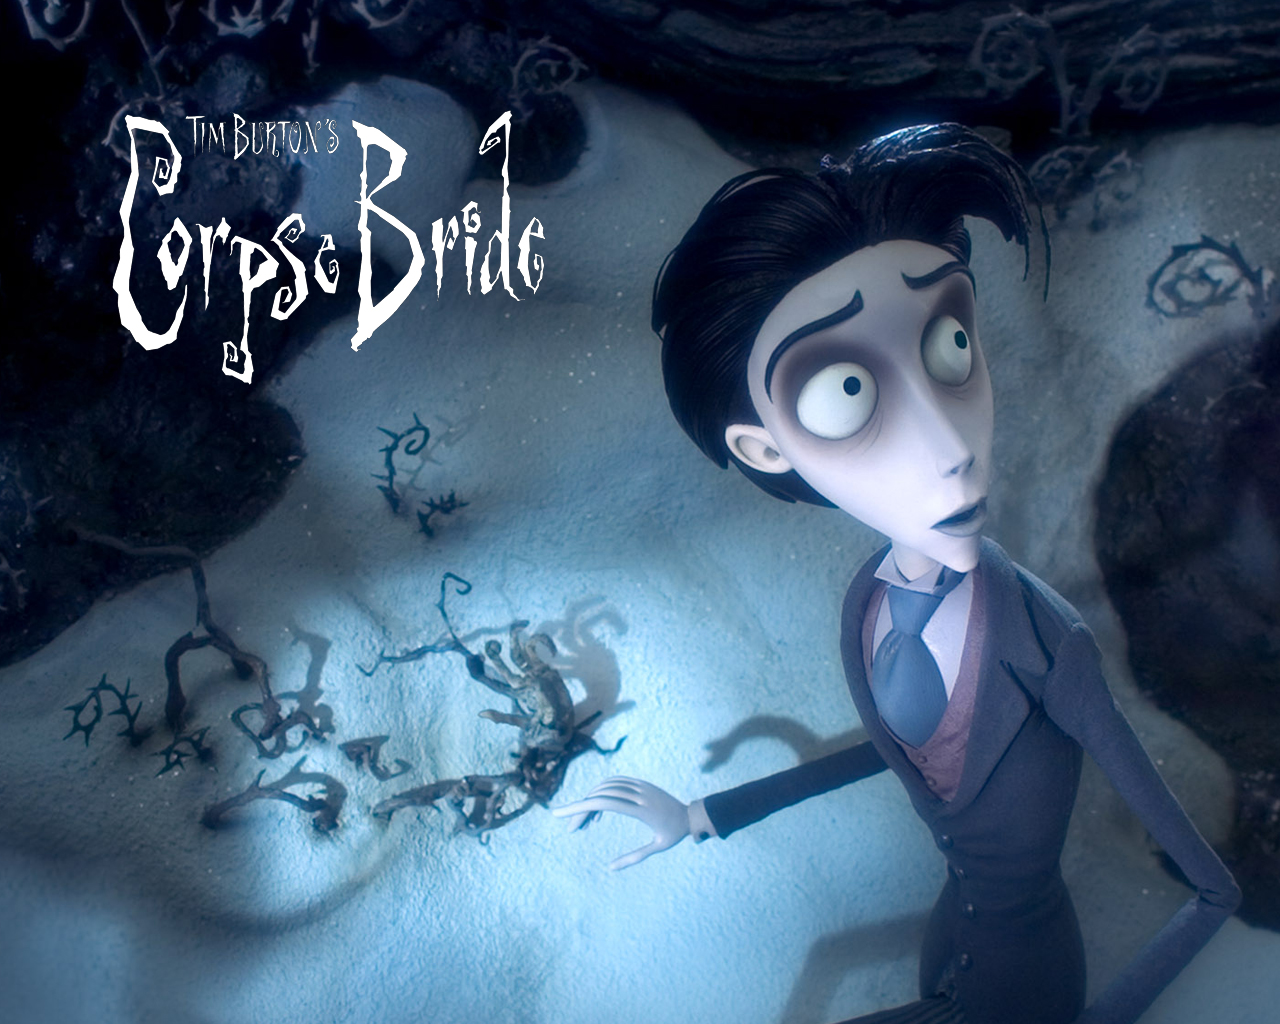 Download full size Corpse Bride wallpaper / Movies / 1280x1024